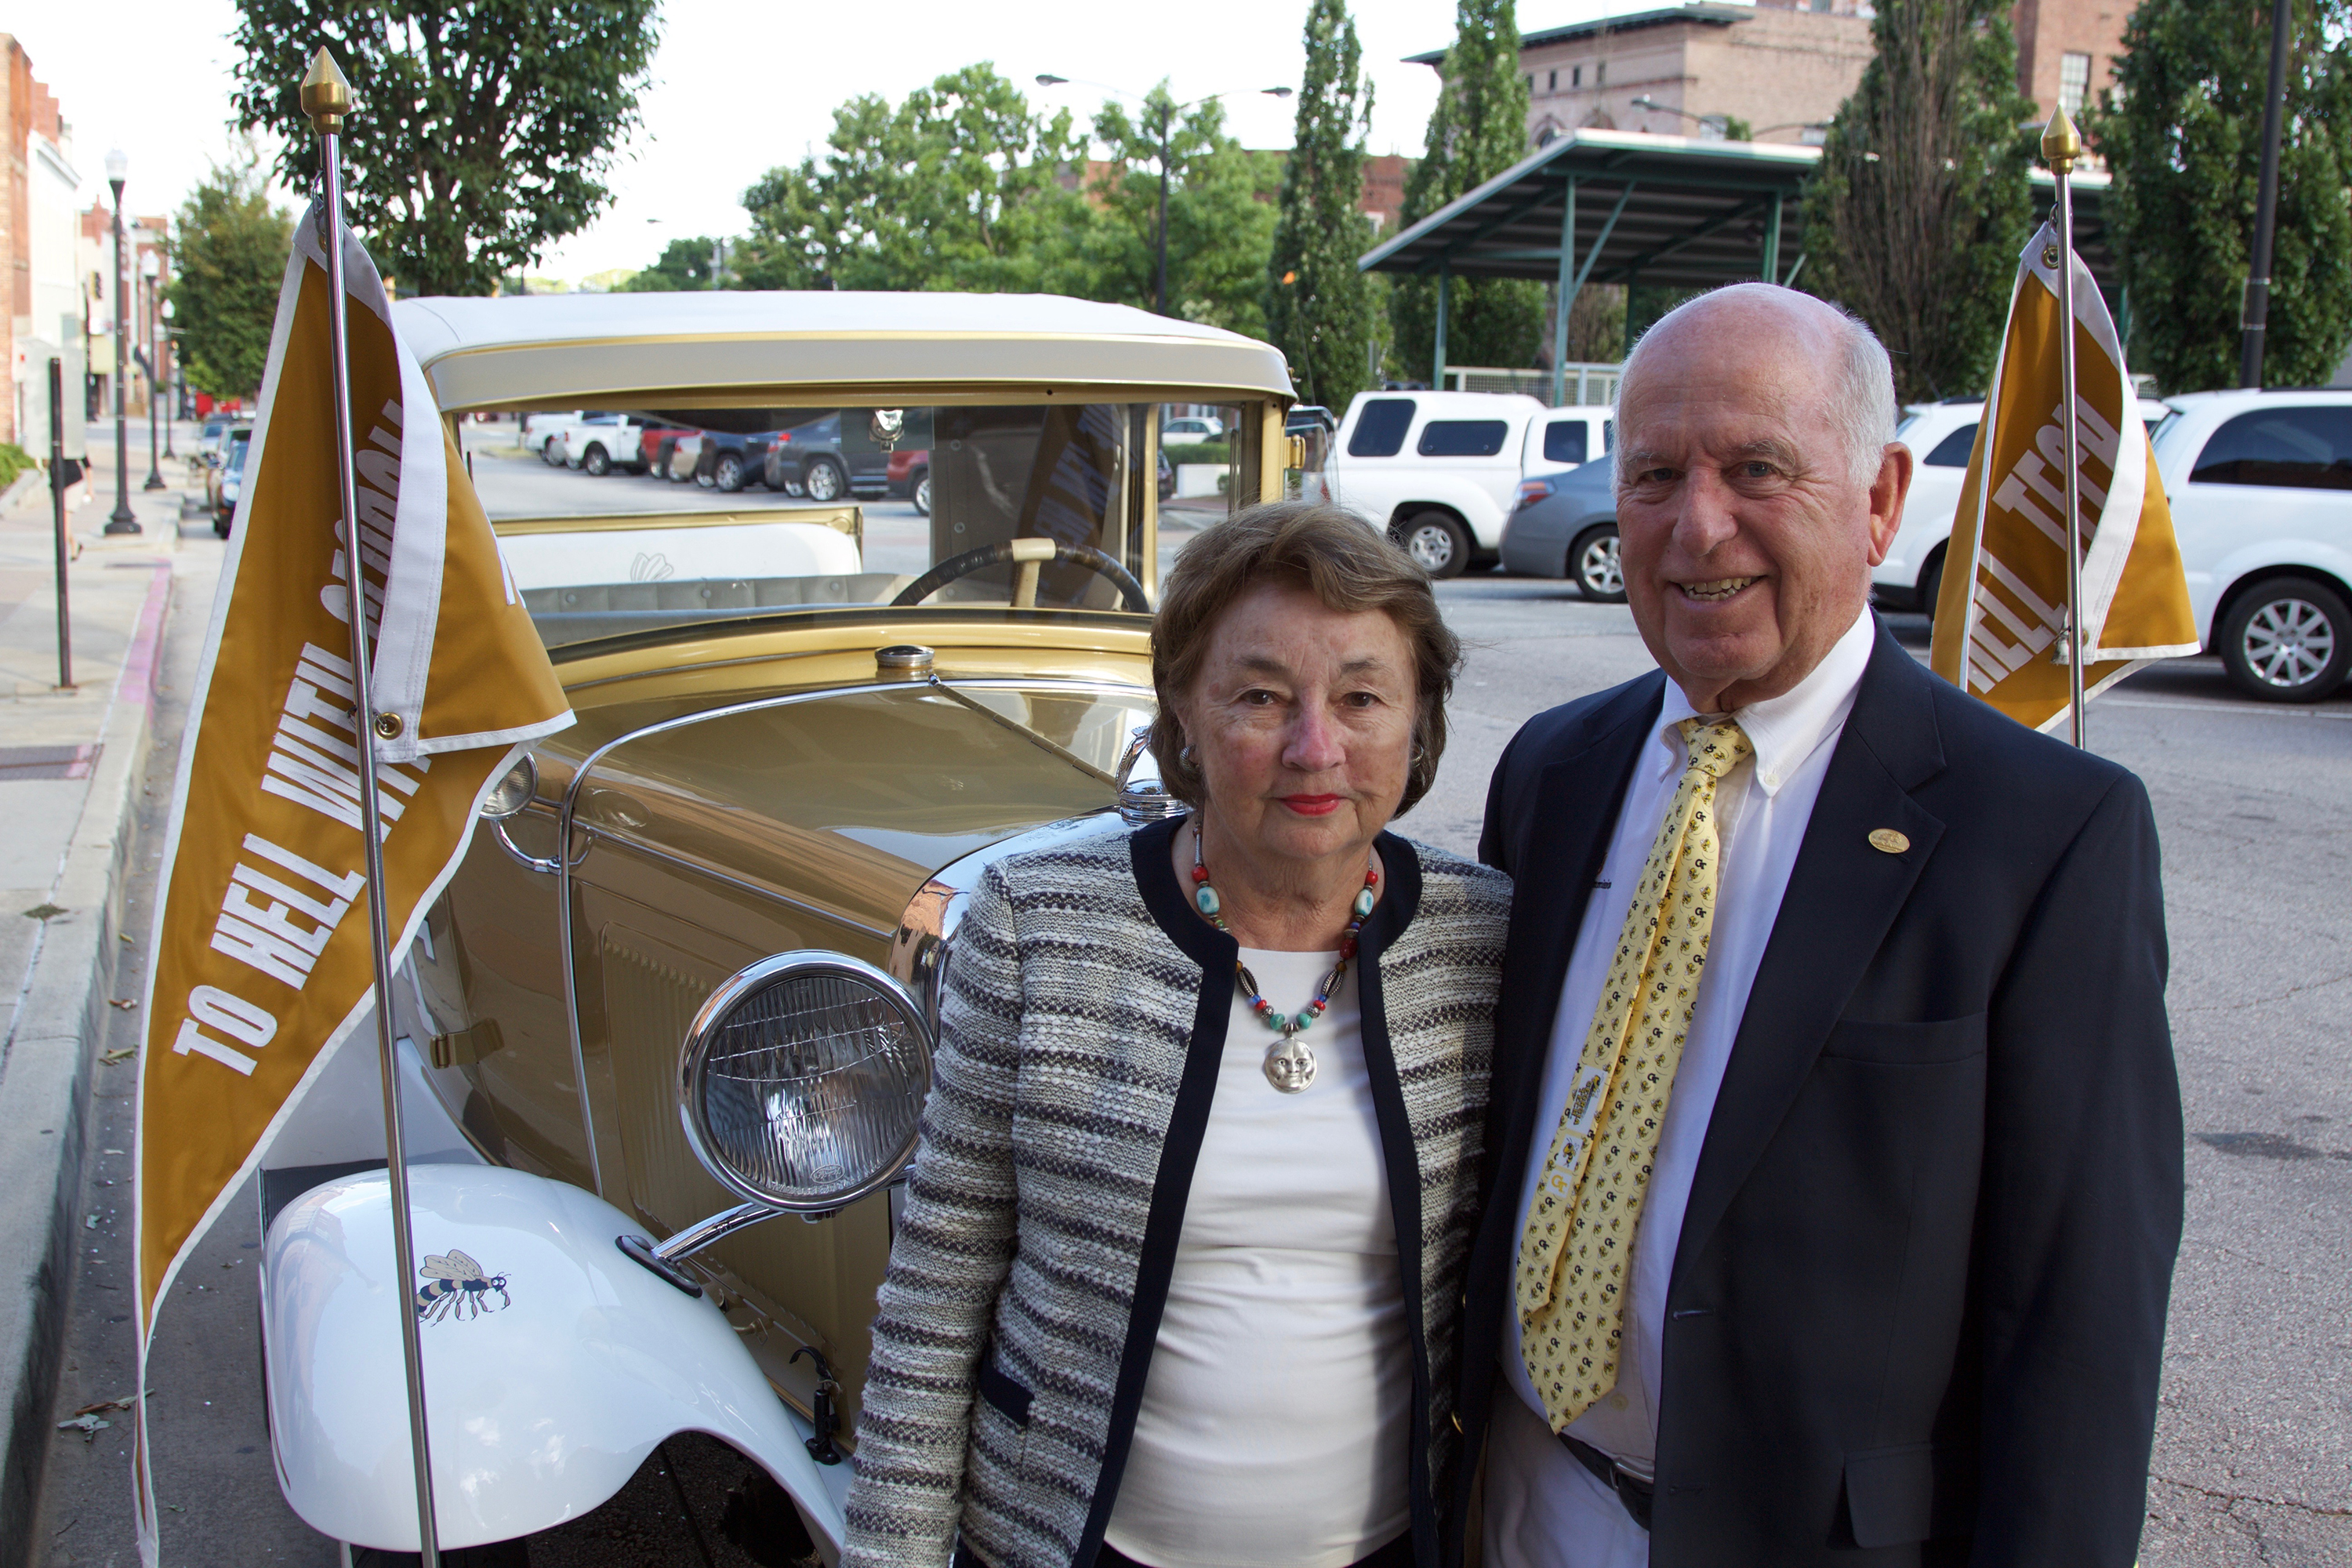 Macon architect Eugene Dunwoody Sr., Georgia Tech class of 1955, and his wife, Susan, pose with the famous Ramblin’ Wreck outside the Blacksmith Shop in downtown Macon June 20 during a Georgia Tech alumni reception.